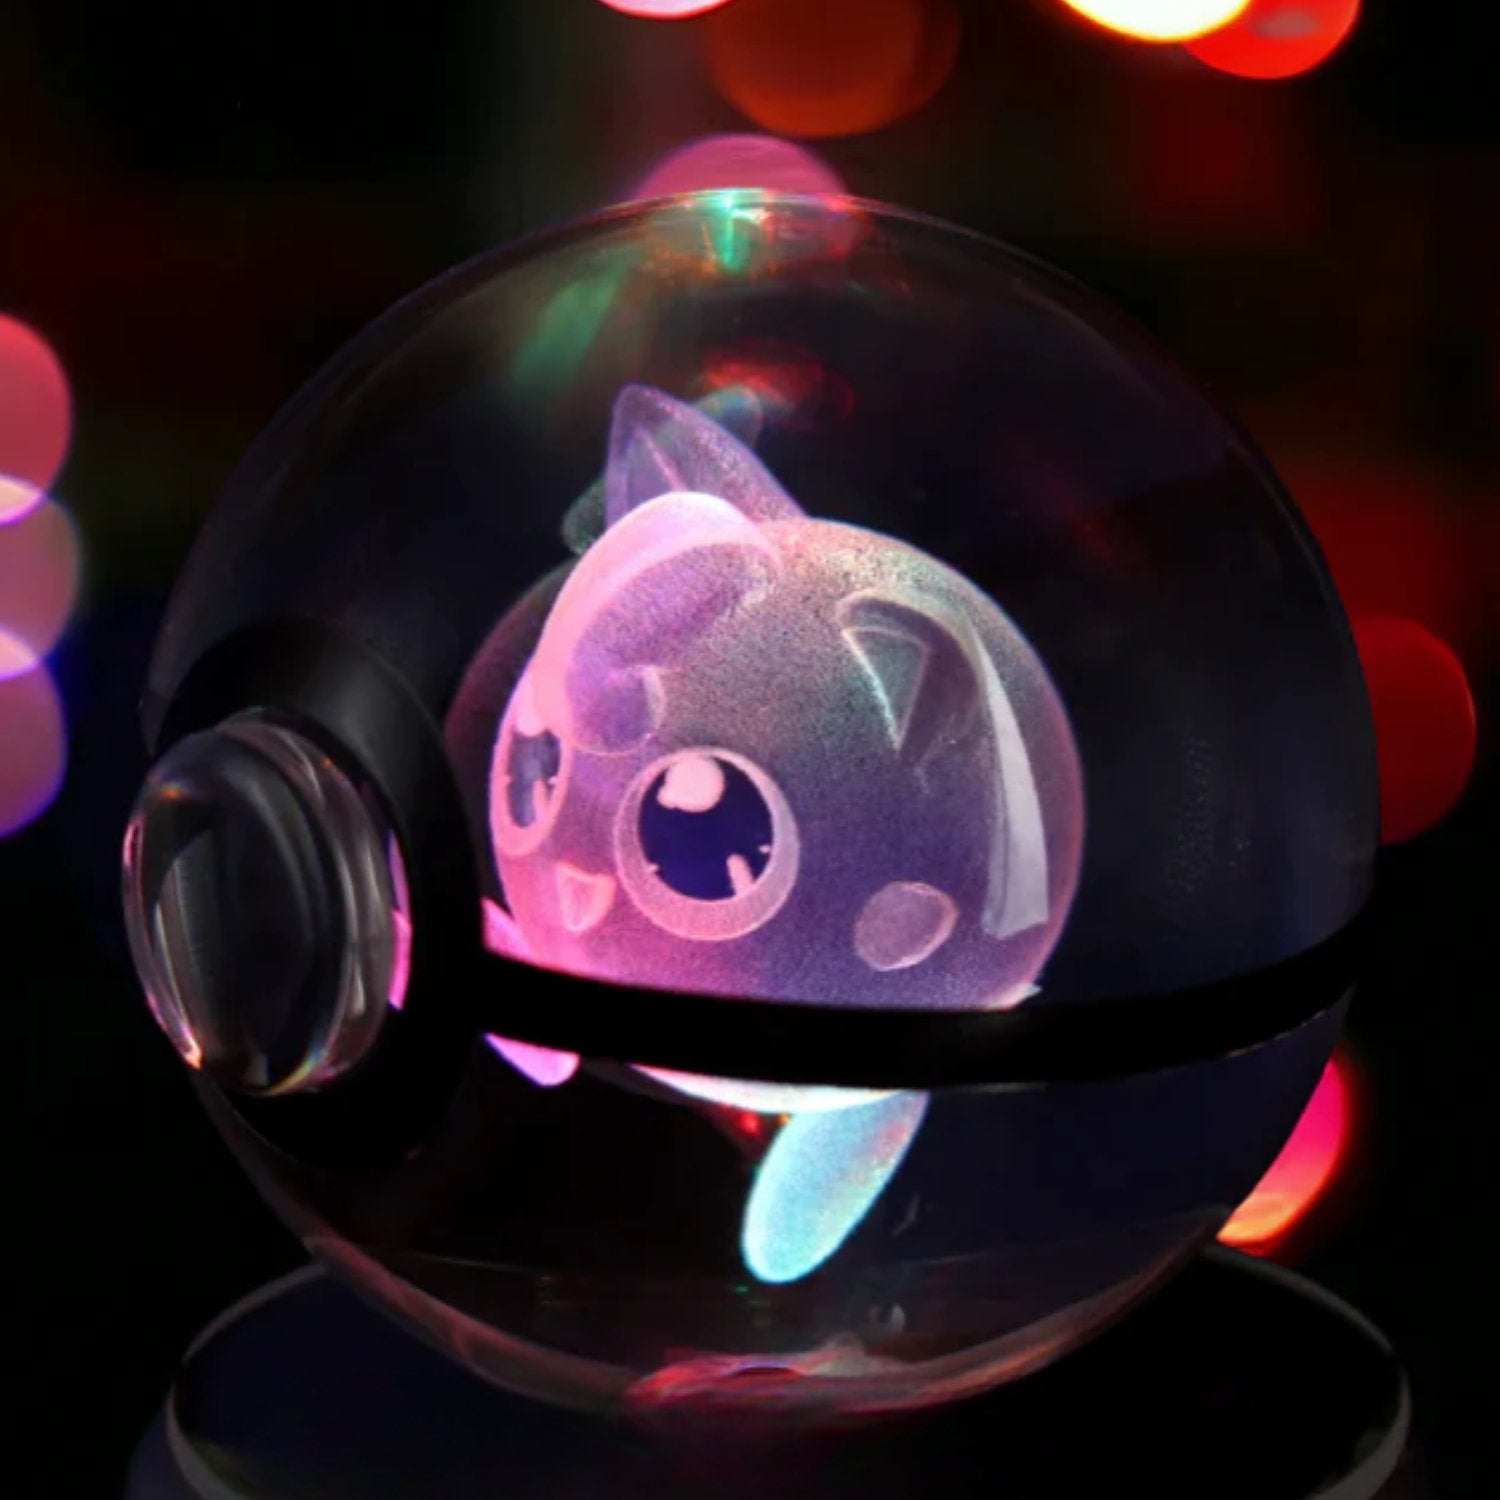 Gastly Humidifier - 3D printed luminous Pokémon humidifier with advanced mist emission, UV disinfection, and blue purple ambient night light glow.